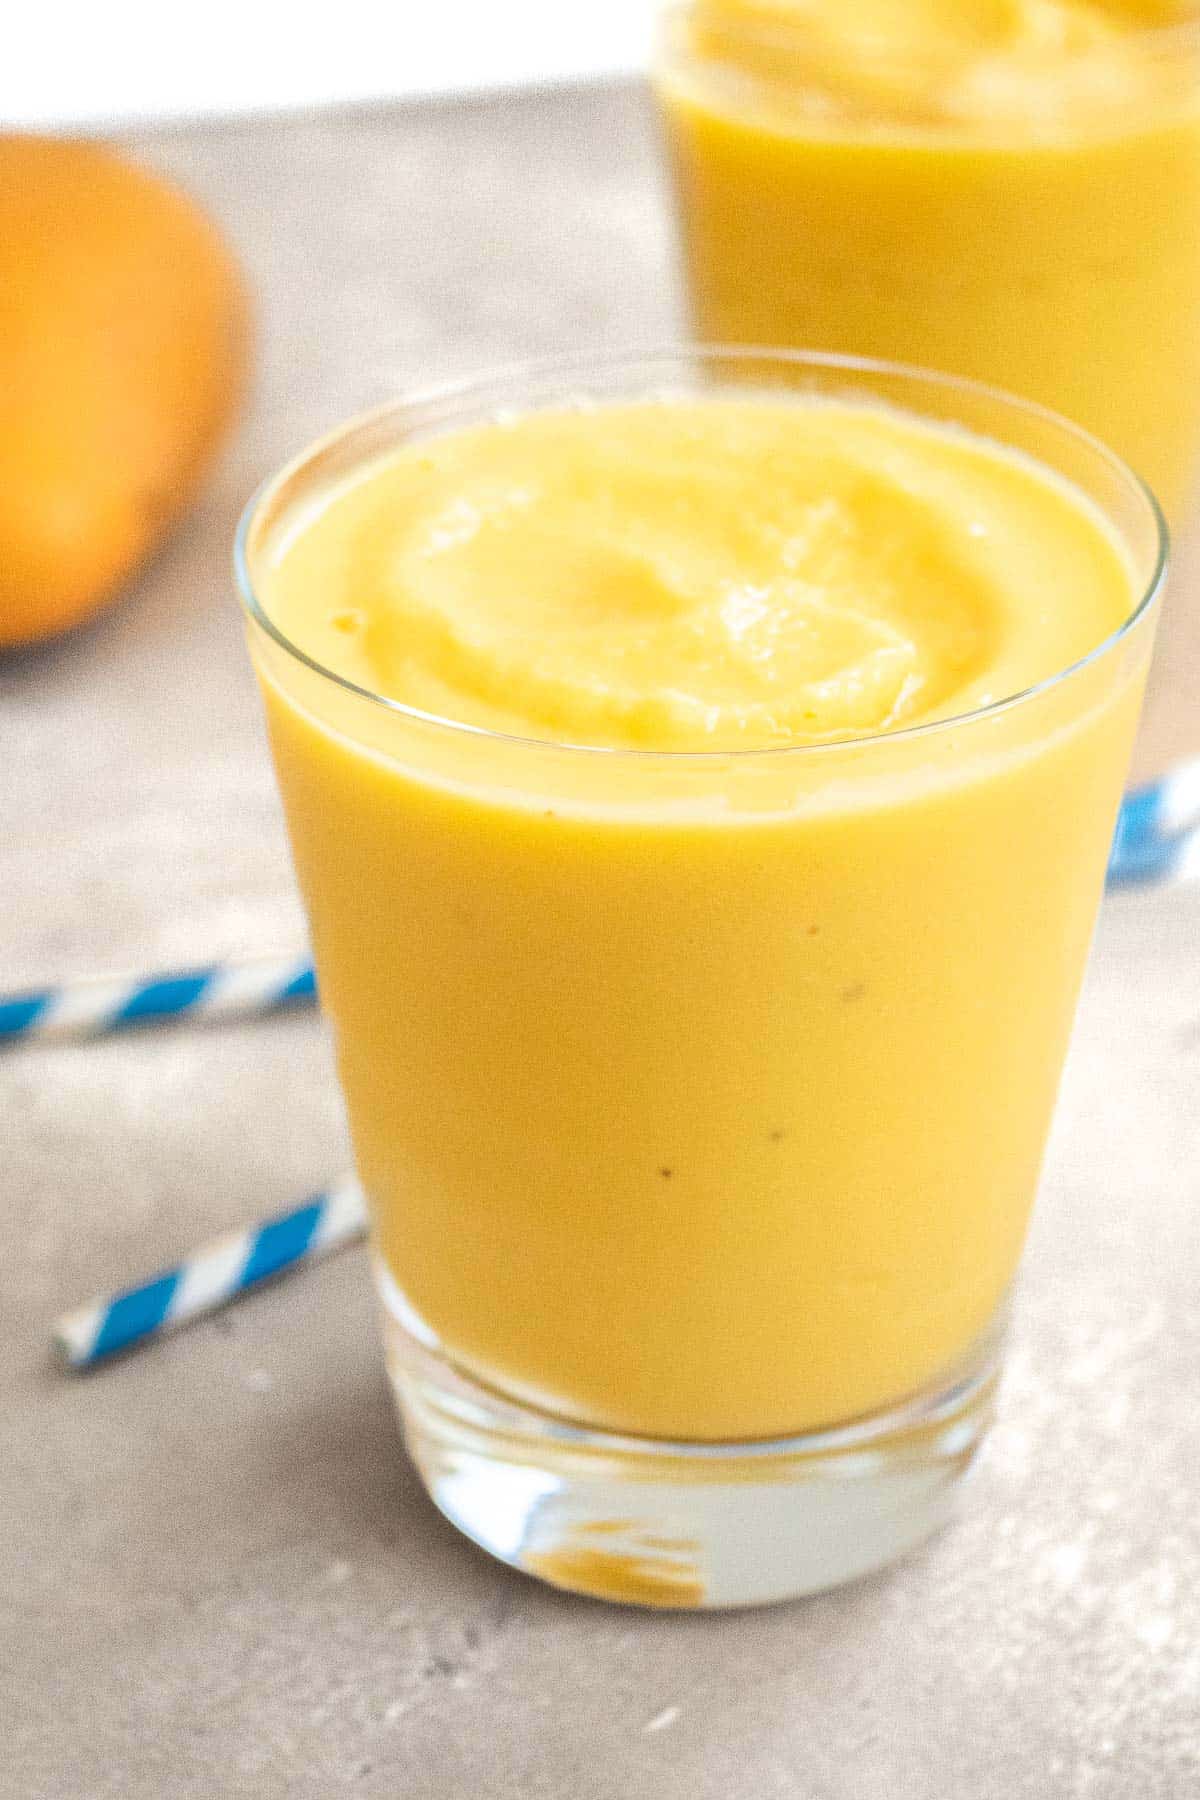 how to make a mango smoothie step by step